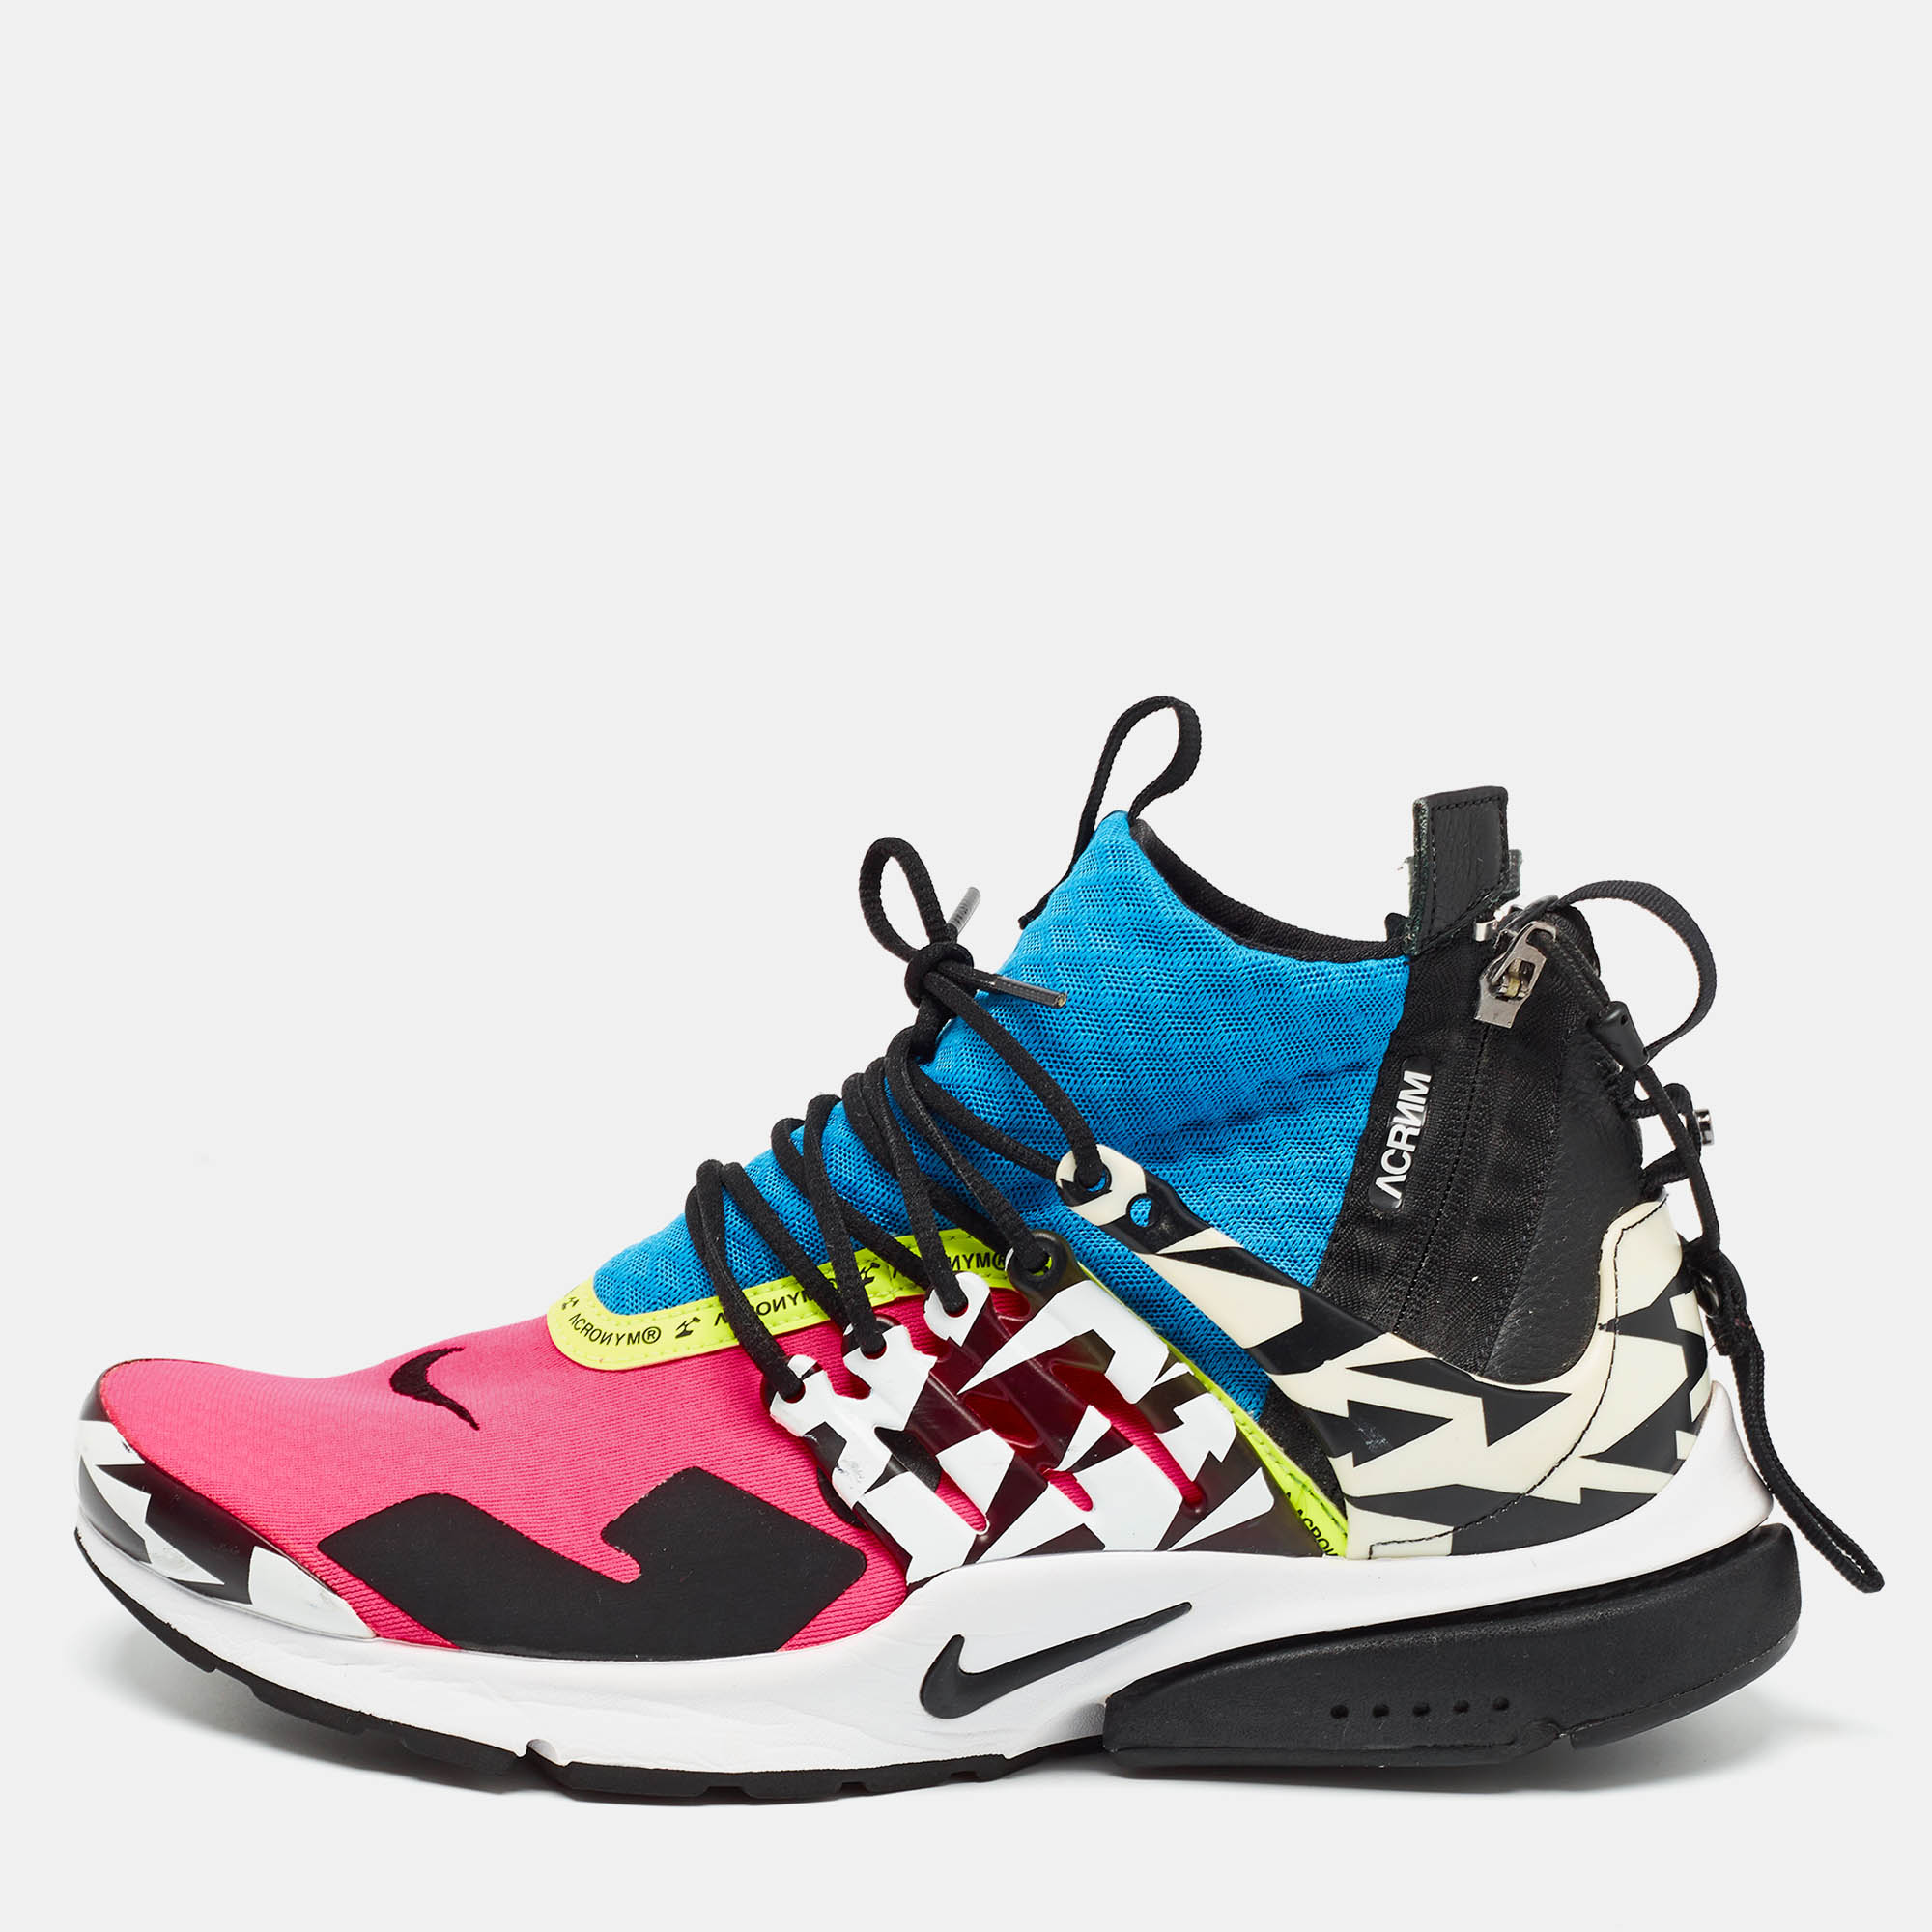 Pre-owned Nike Acronym X Air Presto Multicolor Fabric And Leather Mid Racer Trainers Size 45